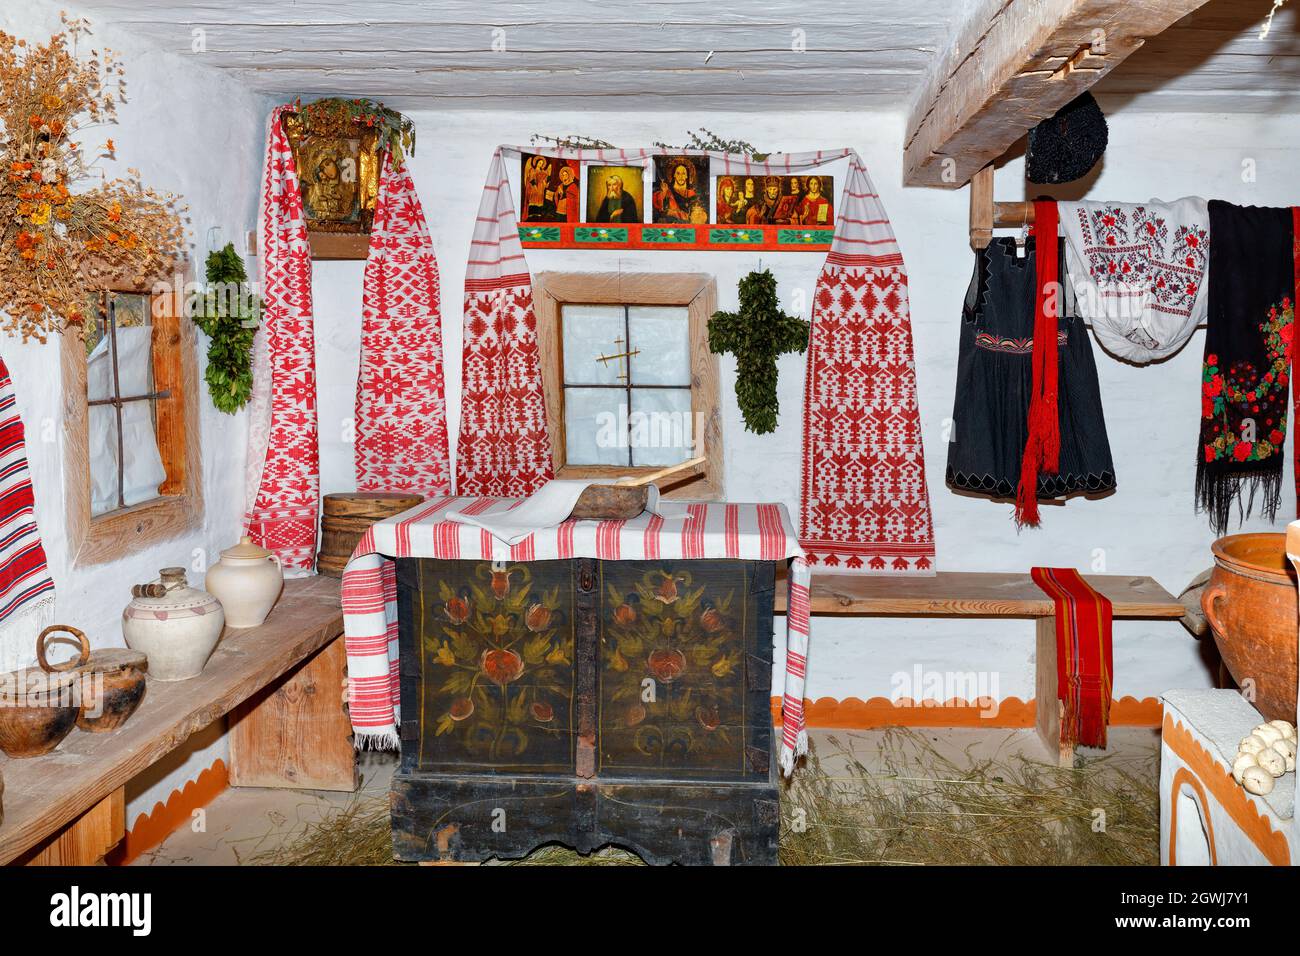 The interior of the living quarters of an antique Ukrainian rural hut with holy images above the window and old clothes and dishes. Stock Photo